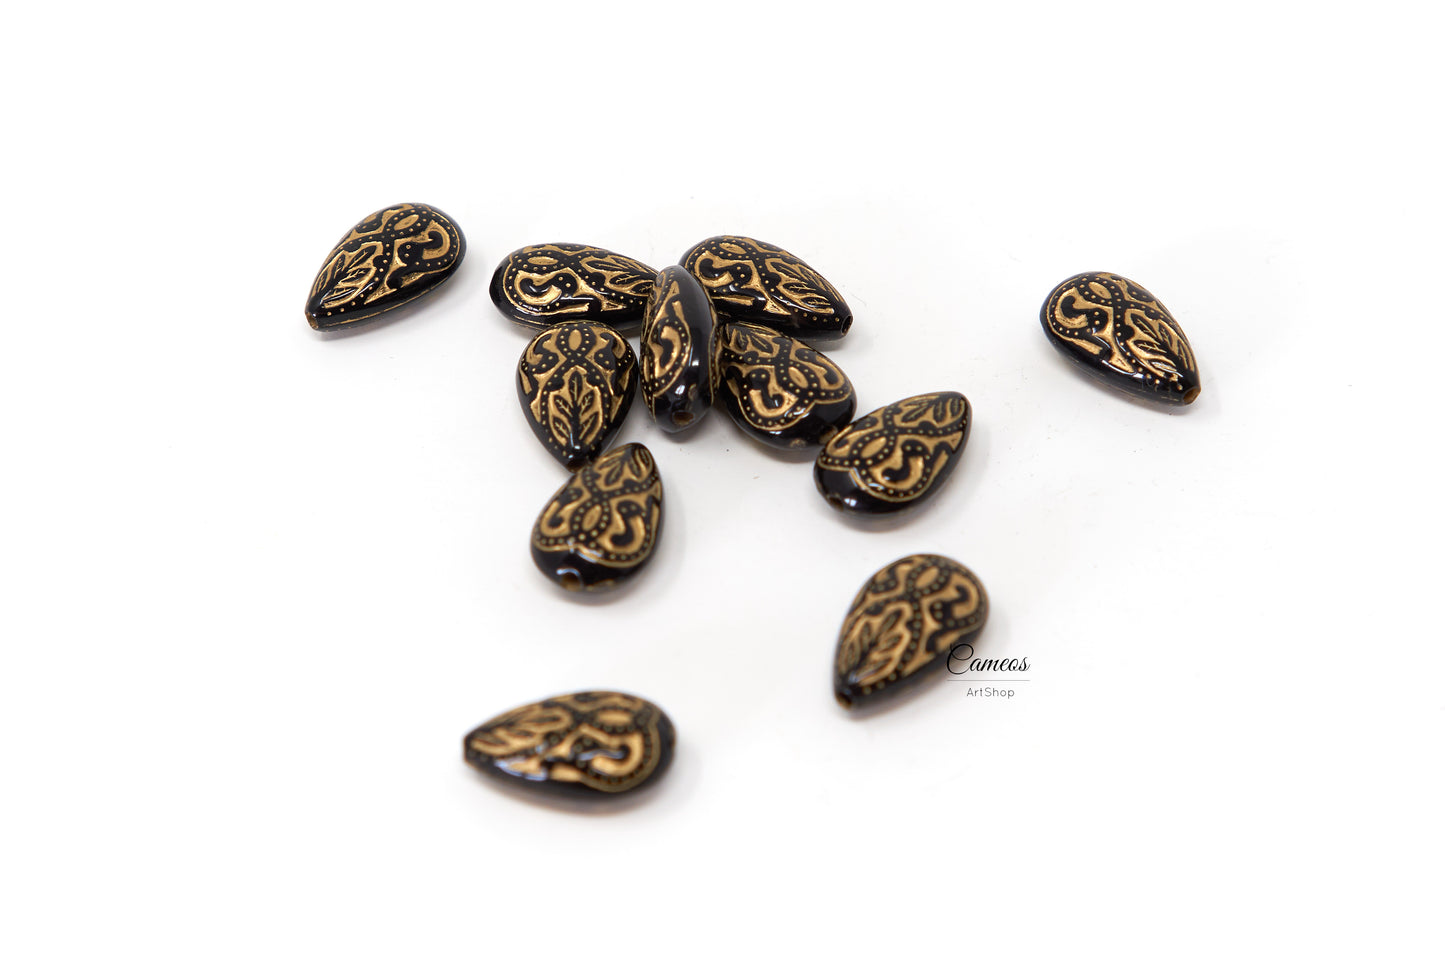 20 pcs Acrylic Drop Gold Laced Beads, Black Gold Etched Teardrop Bead, Flat Drop Beads 18mm